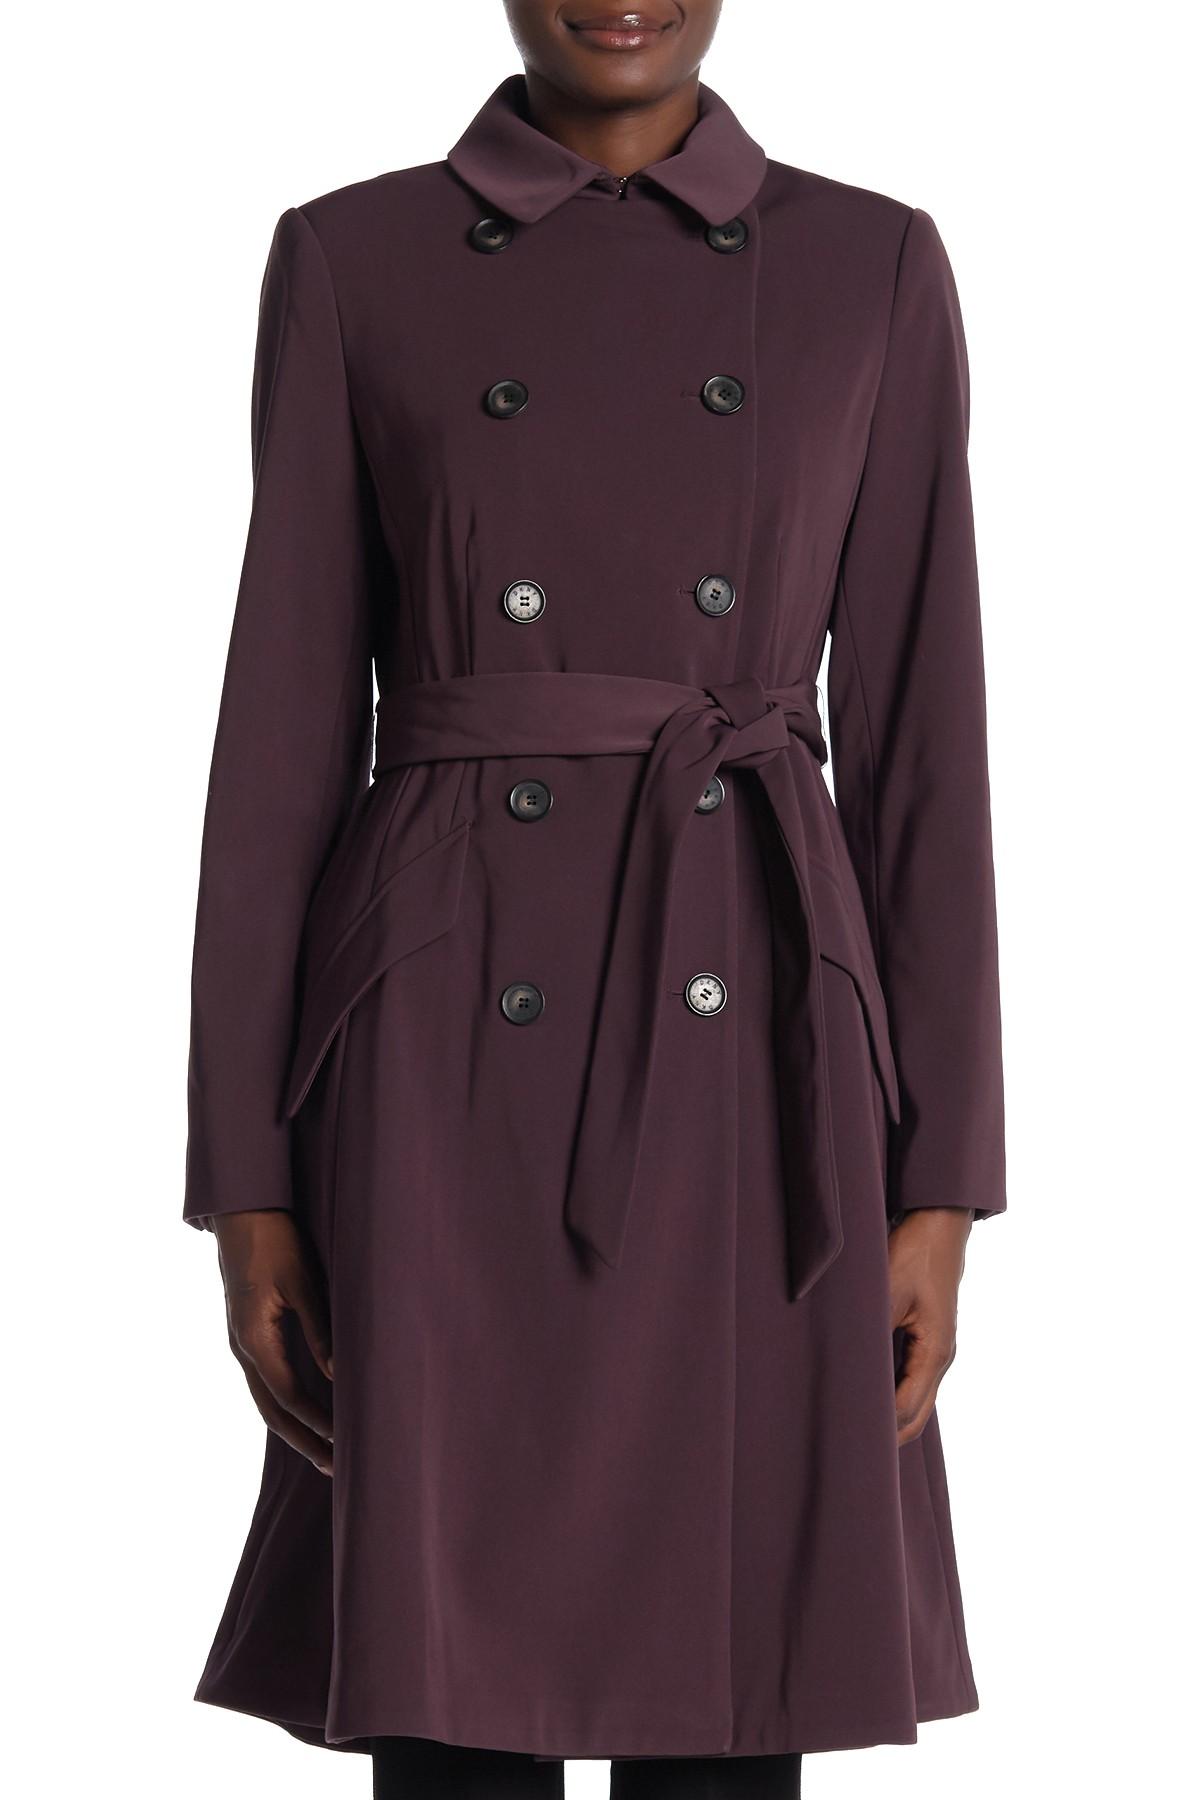 DKNY Synthetic Double Breasted Trench Coat in Purple - Lyst